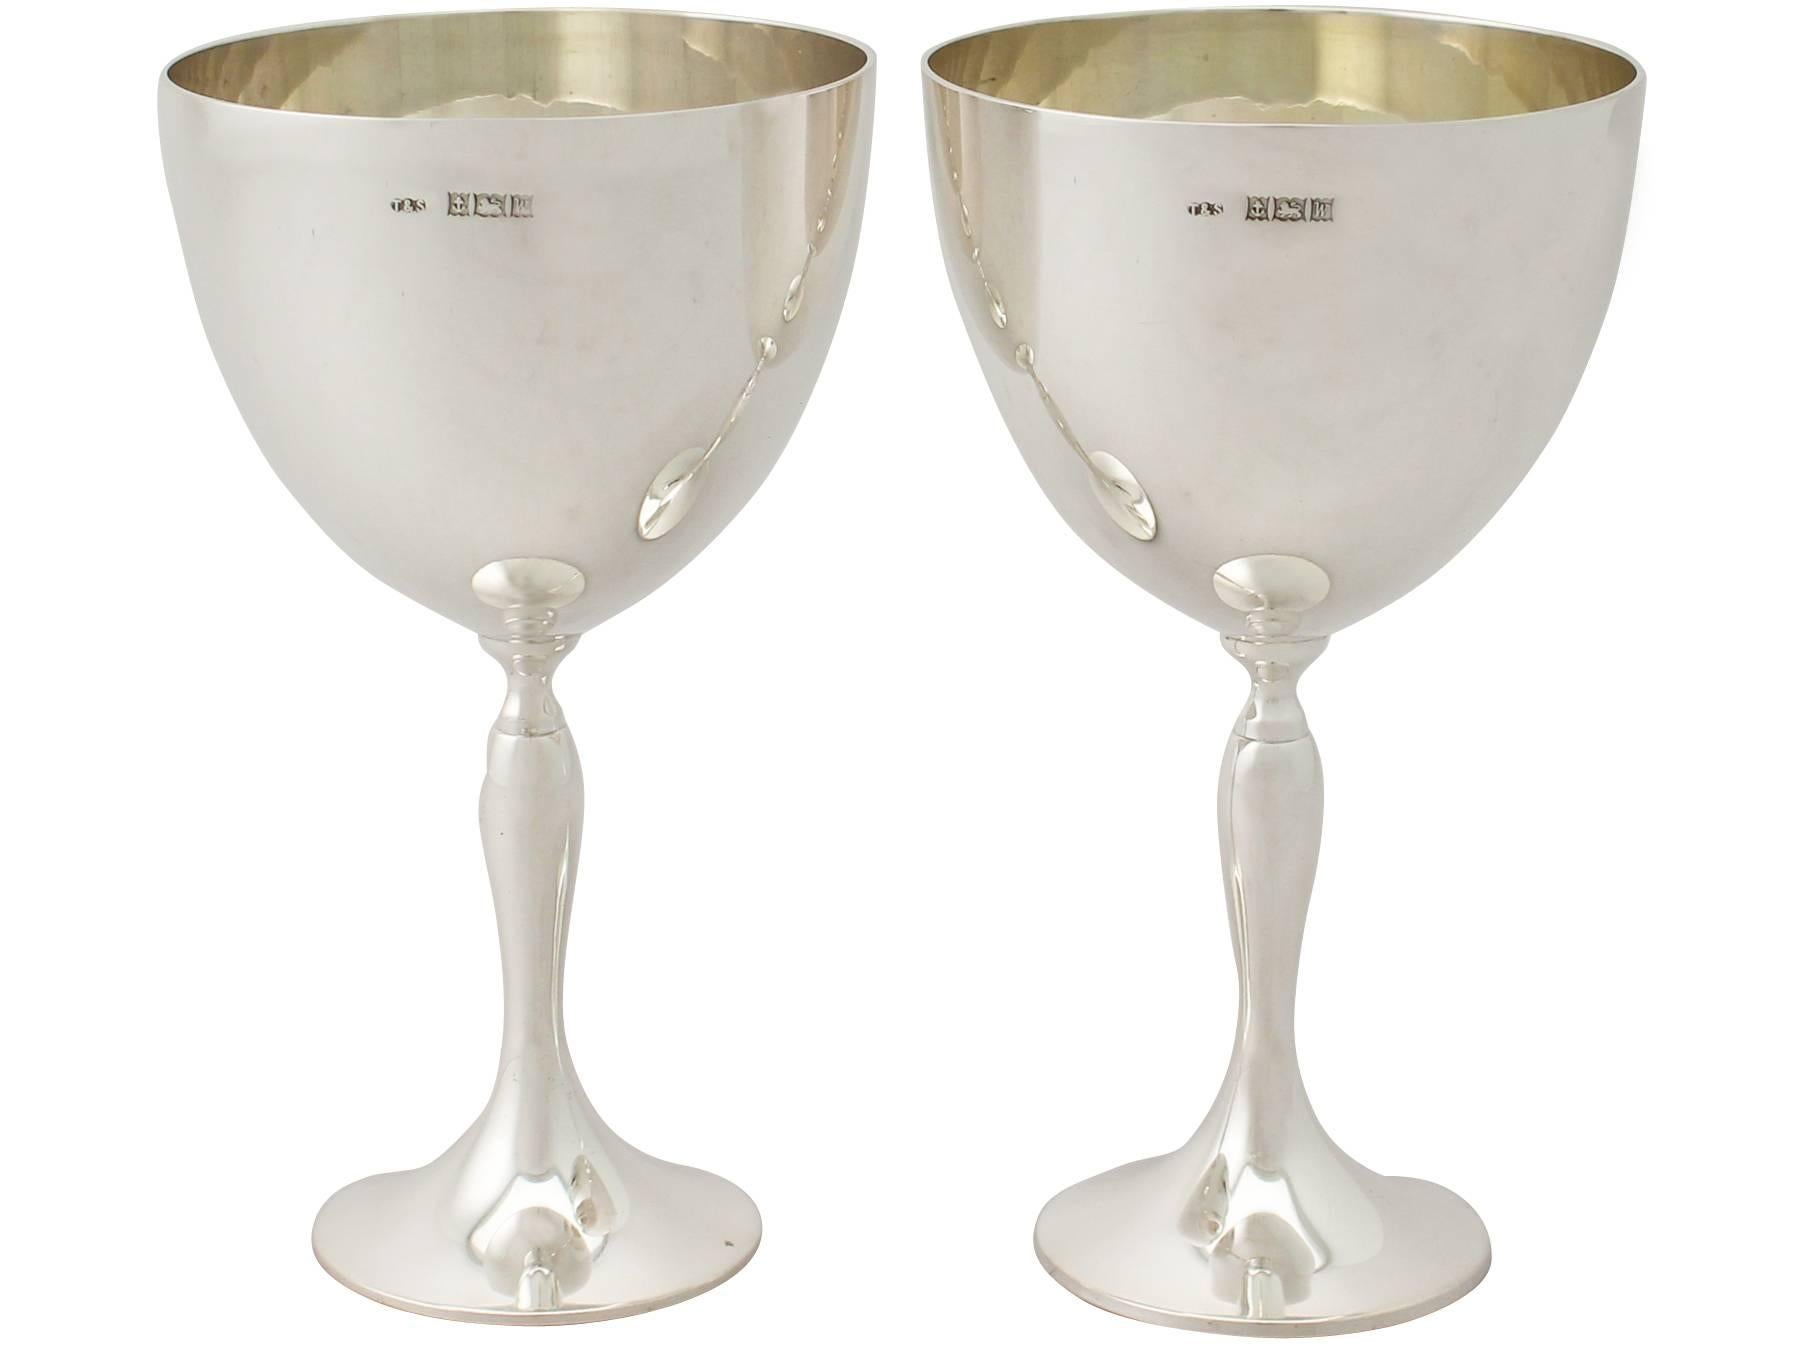 An exceptional, fine and impressive pair of vintage Elizabeth II English sterling silver goblets; an addition to our range of wine and drink related silverware.

These exceptional vintage Elizabeth II sterling silver goblets have a plain bell shaped